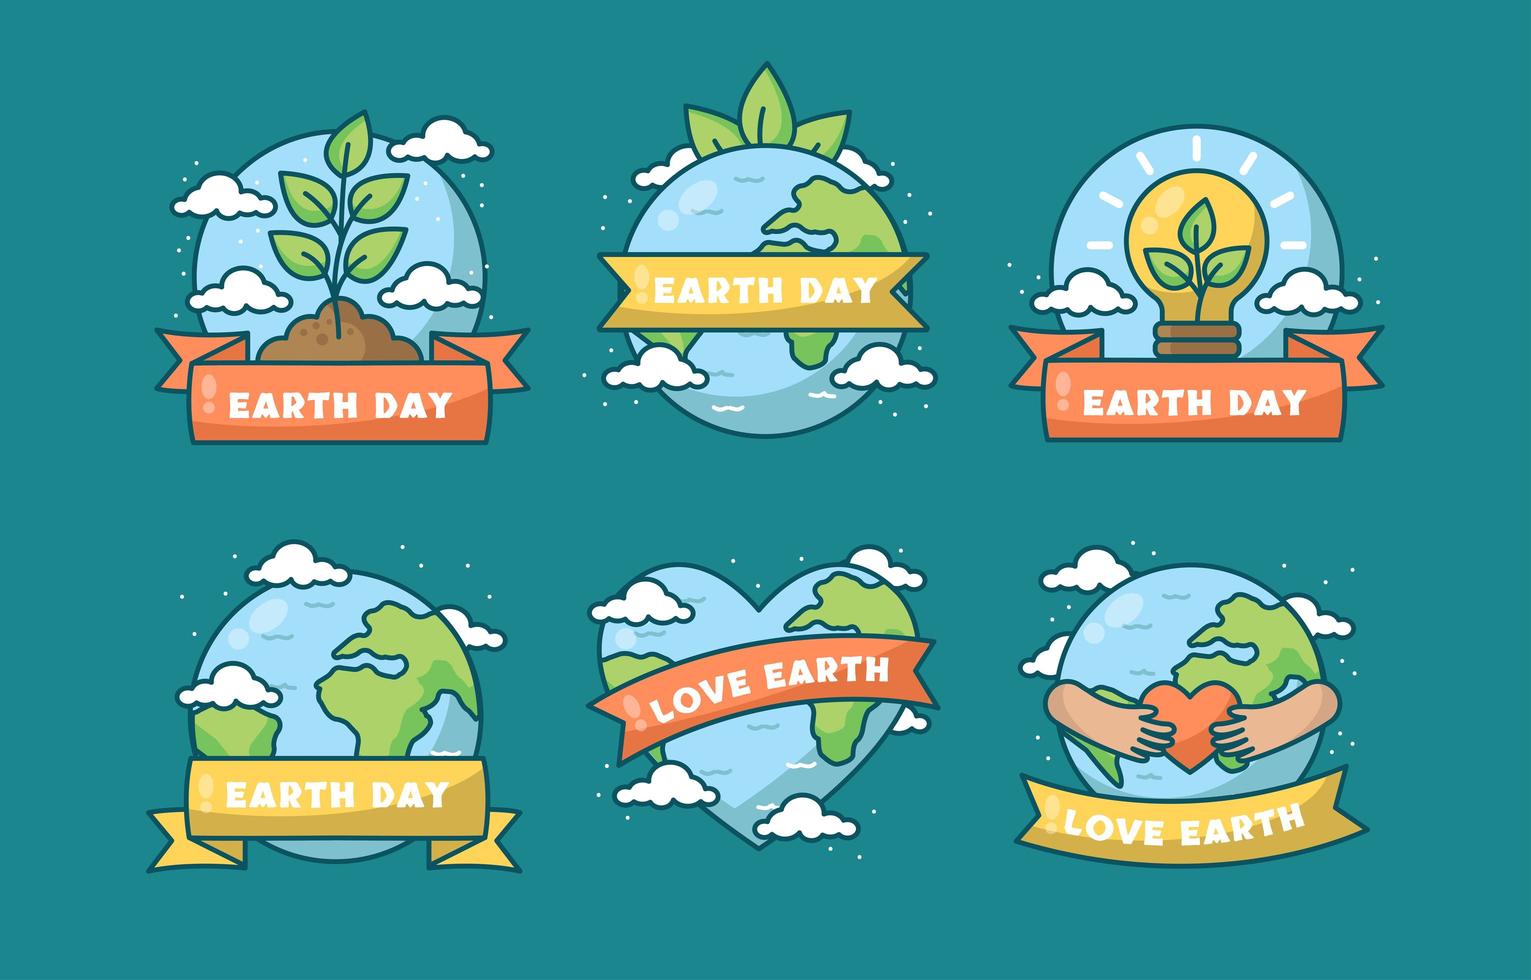 Taking Care of Our Home Planet Earth Day vector